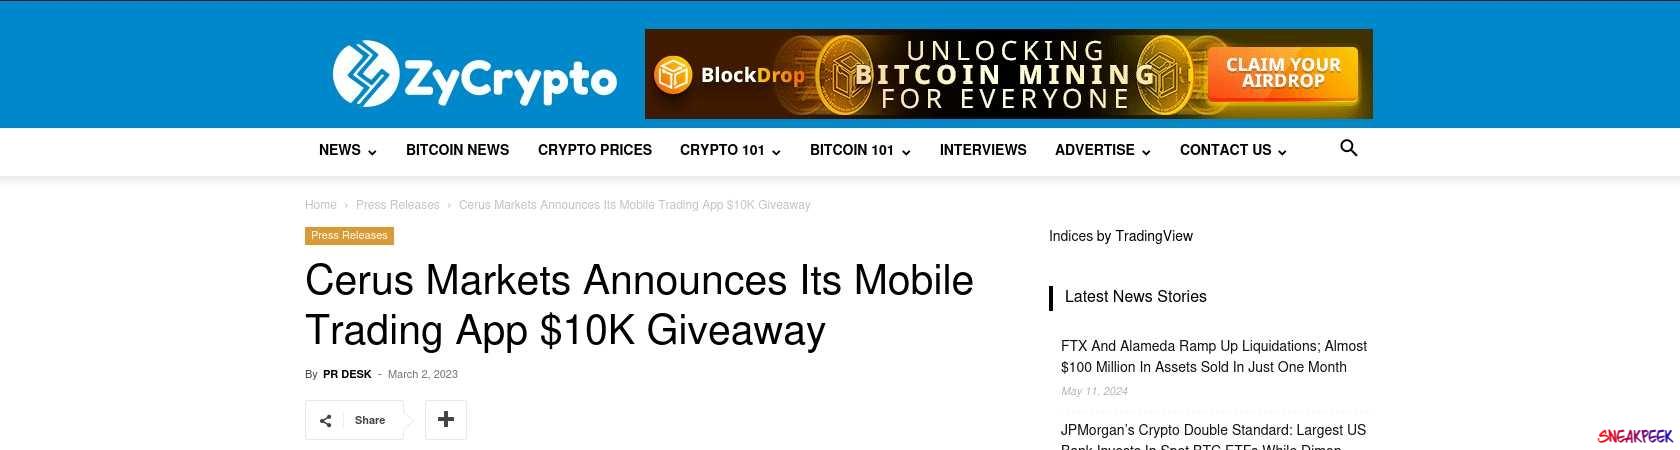 Read the full Article:  ⭲ Cerus Markets Announces Its Mobile Trading App $10K Giveaway